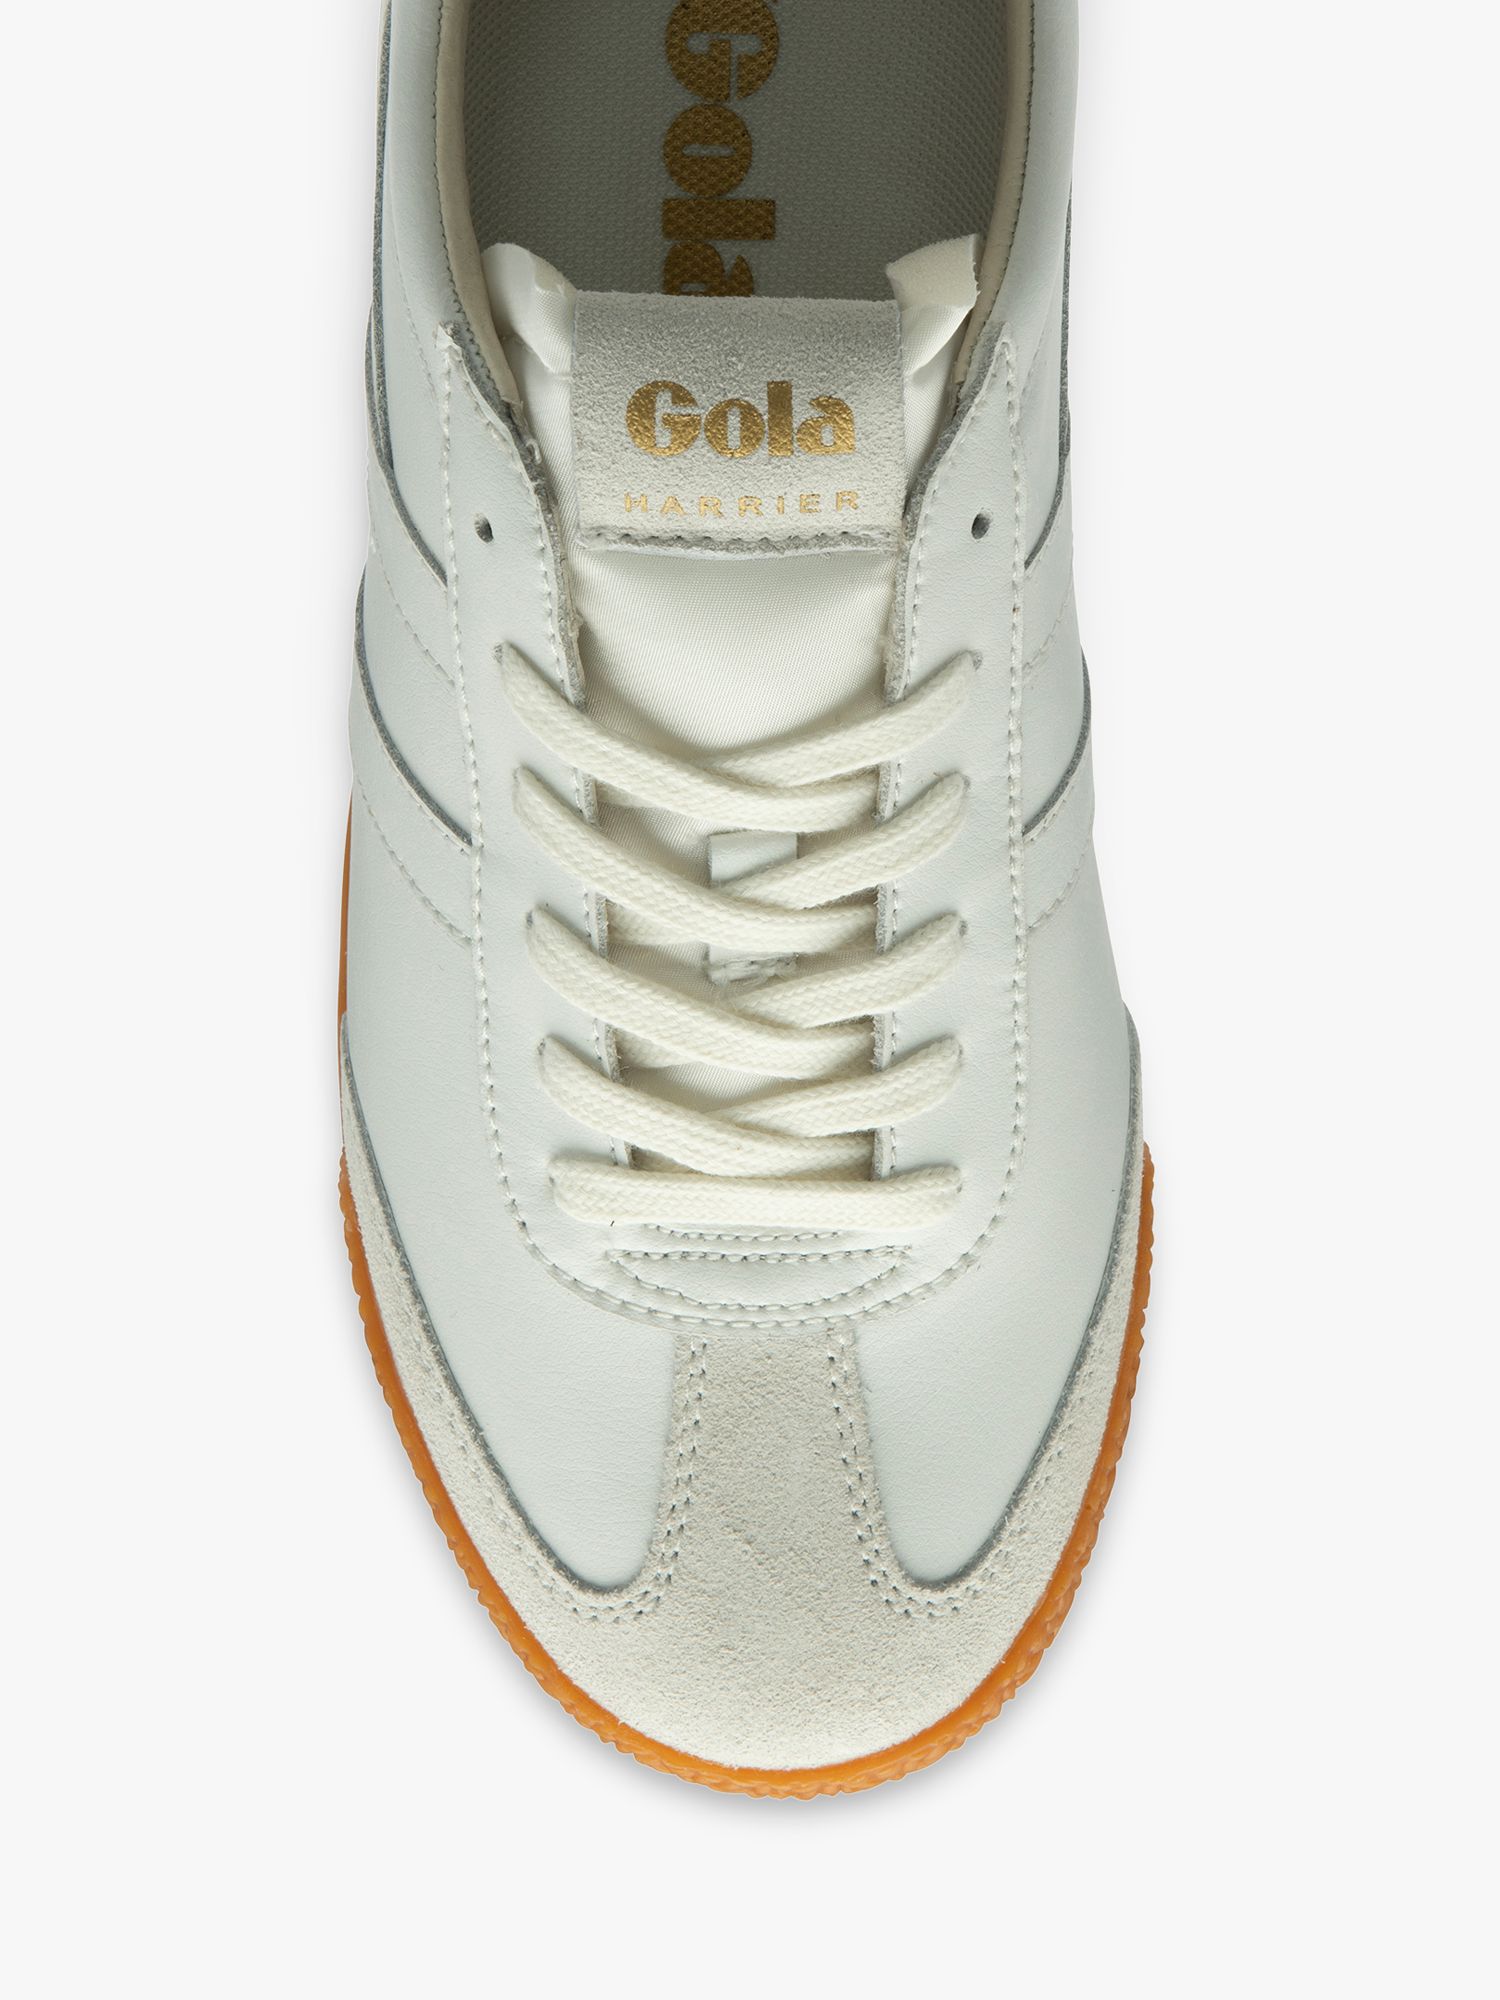 Buy Gola Classics Harrier 001 Leather Lace up Trainers, White/Gum Online at johnlewis.com